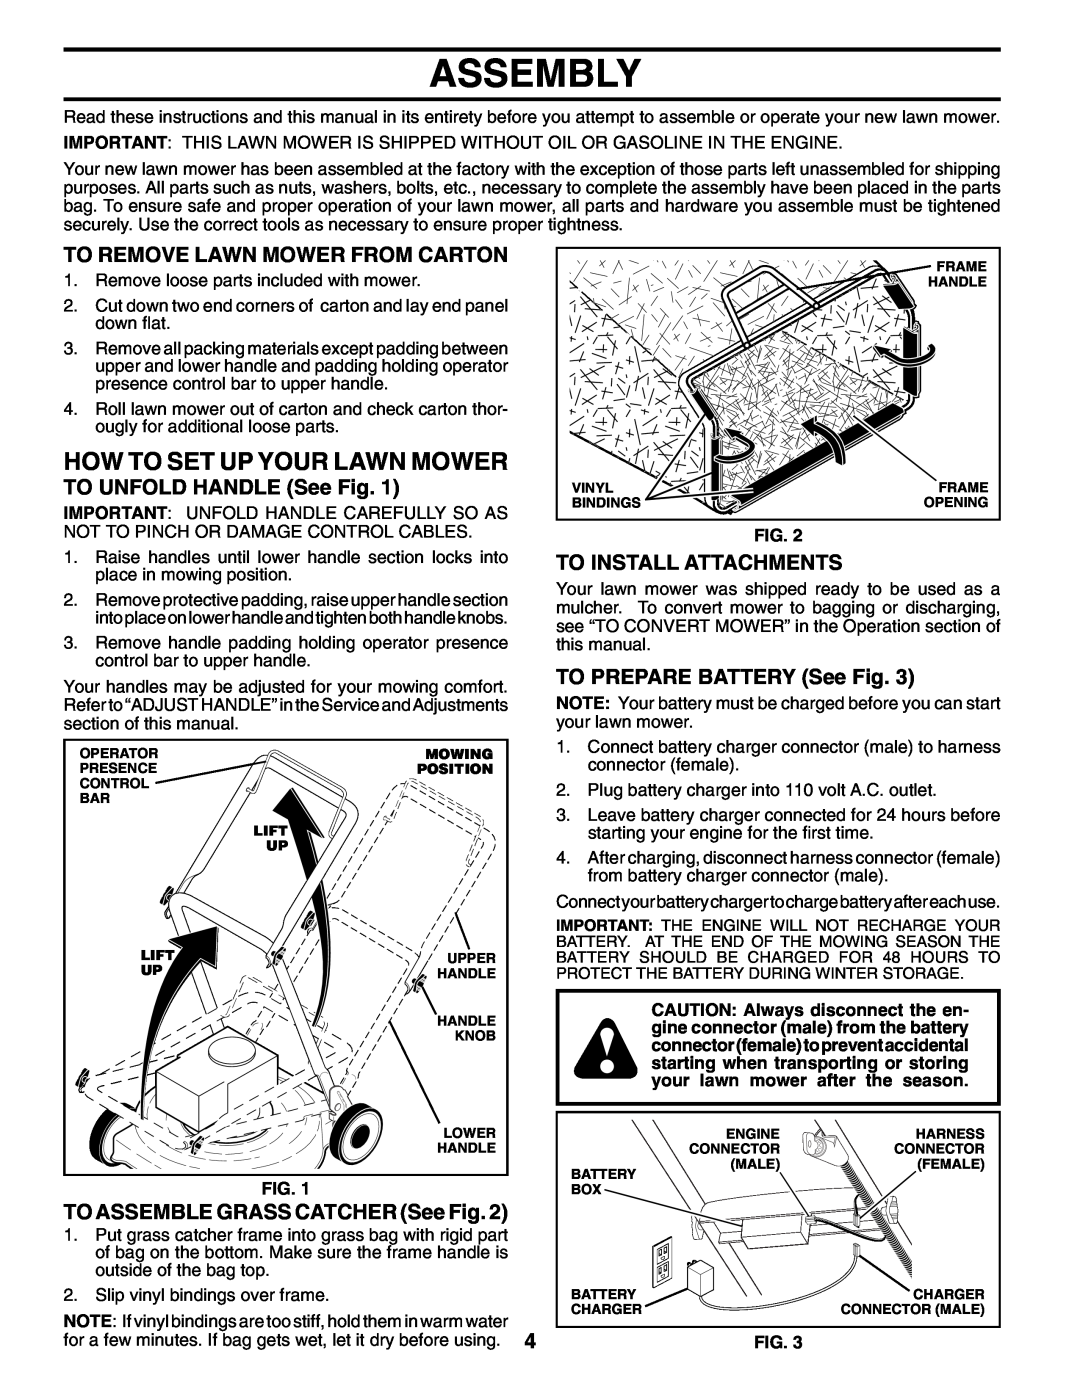 Husqvarna 65022ES Assembly, How To Set Up Your Lawn Mower, To Remove Lawn Mower From Carton, TO UNFOLD HANDLE See Fig 